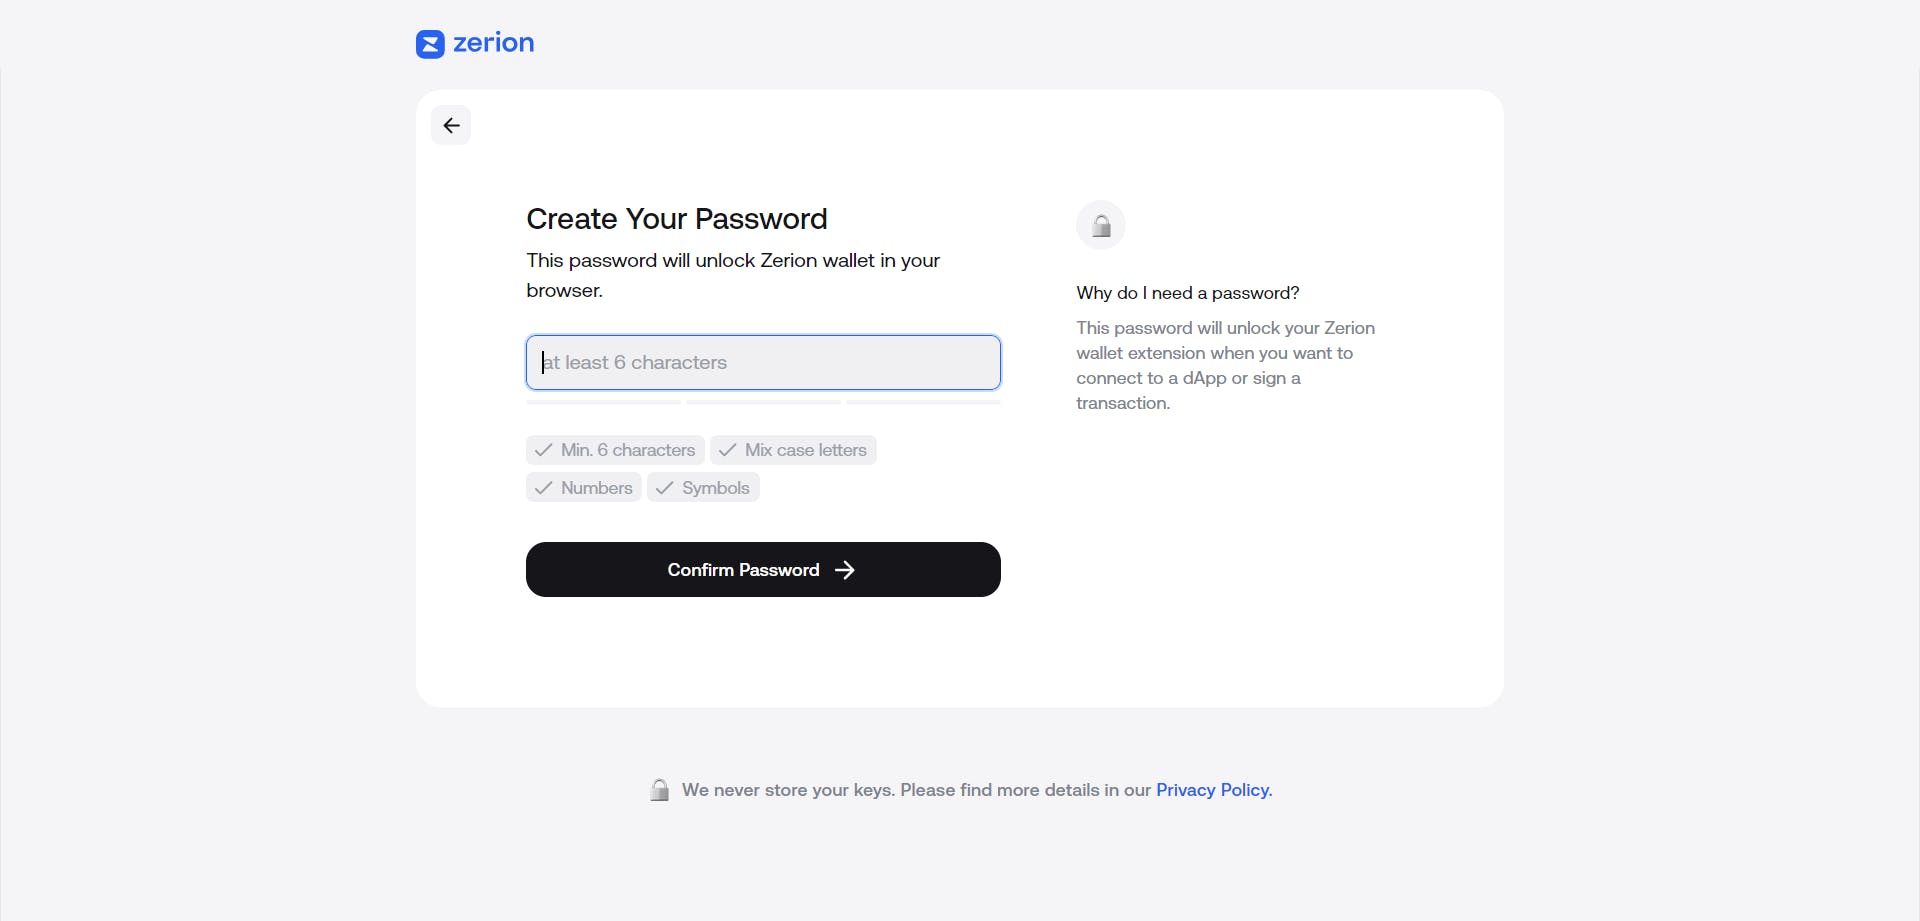 Setting up your password